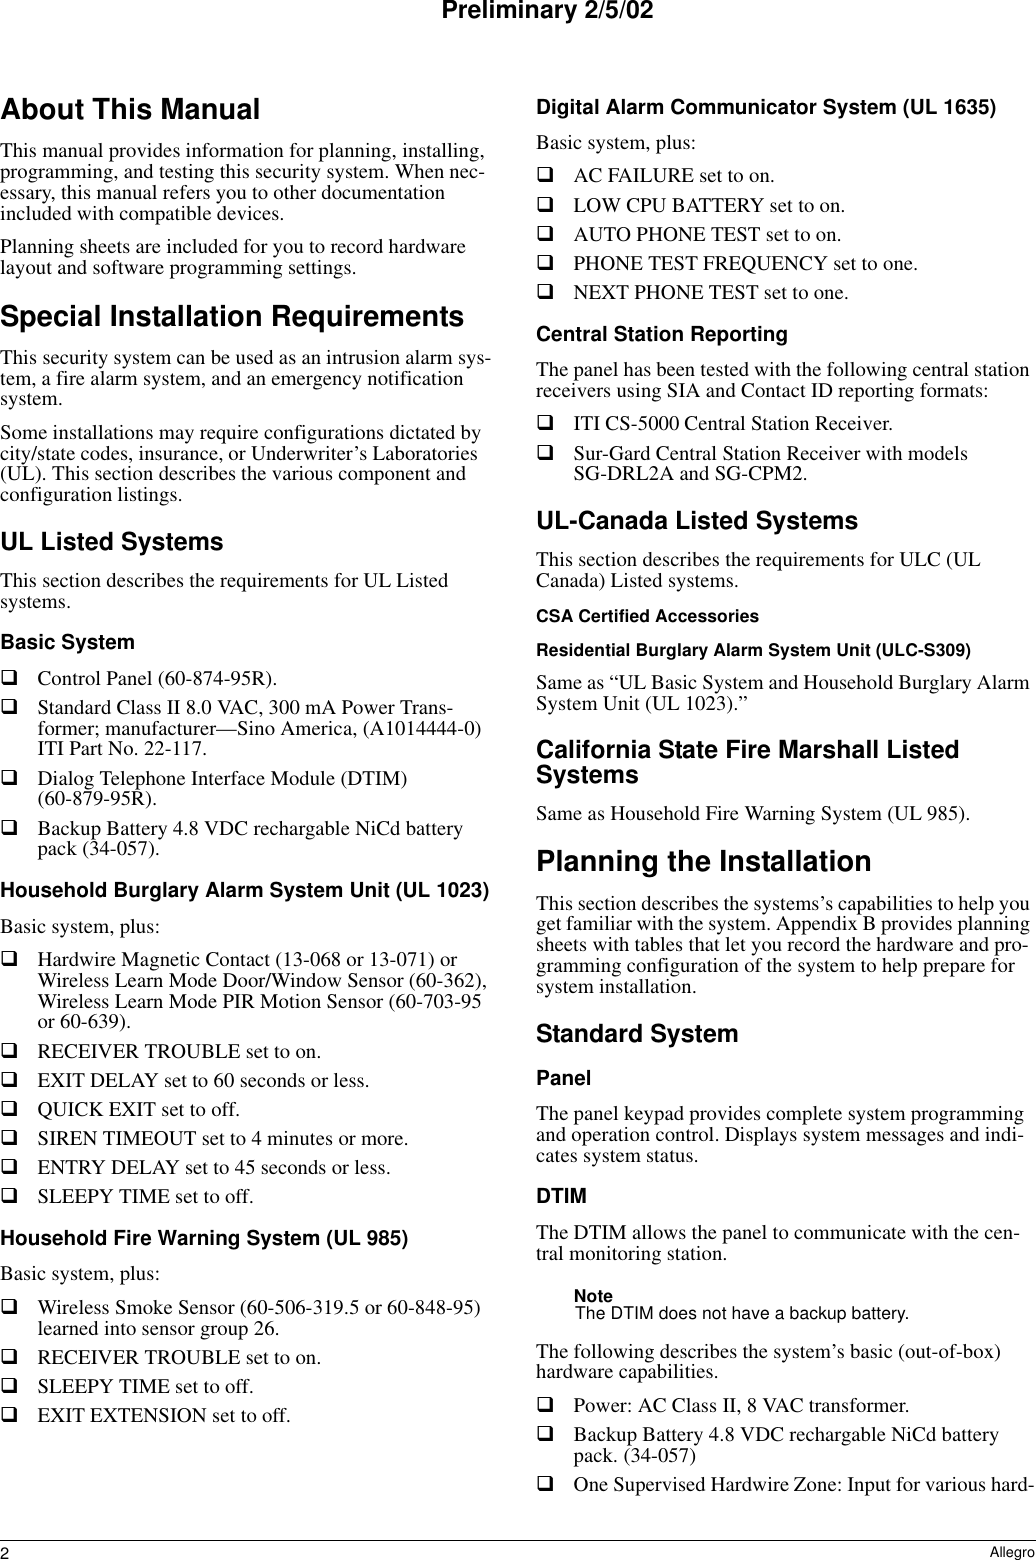 2AllegroPreliminary 2/5/02About This ManualThis manual provides information for planning, installing, programming, and testing this security system. When nec-essary, this manual refers you to other documentation included with compatible devices.Planning sheets are included for you to record hardware layout and software programming settings.Special Installation RequirementsThis security system can be used as an intrusion alarm sys-tem, a fire alarm system, and an emergency notification system.Some installations may require configurations dictated by city/state codes, insurance, or Underwriter’s Laboratories (UL). This section describes the various component and configuration listings.UL Listed SystemsThis section describes the requirements for UL Listed systems.Basic SystemControl Panel (60-874-95R).Standard Class II 8.0 VAC, 300 mA Power Trans-former; manufacturer—Sino America, (A1014444-0) ITI Part No. 22-117.Dialog Telephone Interface Module (DTIM) (60-879-95R).Backup Battery 4.8 VDC rechargable NiCd battery pack (34-057).Household Burglary Alarm System Unit (UL 1023)Basic system, plus:Hardwire Magnetic Contact (13-068 or 13-071) or Wireless Learn Mode Door/Window Sensor (60-362), Wireless Learn Mode PIR Motion Sensor (60-703-95 or 60-639).RECEIVER TROUBLE set to on.EXIT DELAY set to 60 seconds or less.QUICK EXIT set to off.SIREN TIMEOUT set to 4 minutes or more.ENTRY DELAY set to 45 seconds or less.SLEEPY TIME set to off.Household Fire Warning System (UL 985)Basic system, plus:Wireless Smoke Sensor (60-506-319.5 or 60-848-95) learned into sensor group 26.RECEIVER TROUBLE set to on.SLEEPY TIME set to off.EXIT EXTENSION set to off.Digital Alarm Communicator System (UL 1635)Basic system, plus:AC FAILURE set to on.LOW CPU BATTERY set to on.AUTO PHONE TEST set to on.PHONE TEST FREQUENCY set to one.NEXT PHONE TEST set to one.Central Station ReportingThe panel has been tested with the following central station receivers using SIA and Contact ID reporting formats:ITI CS-5000 Central Station Receiver.Sur-Gard Central Station Receiver with models SG-DRL2A and SG-CPM2.UL-Canada Listed SystemsThis section describes the requirements for ULC (UL Canada) Listed systems.CSA Certified AccessoriesResidential Burglary Alarm System Unit (ULC-S309)Same as “UL Basic System and Household Burglary Alarm System Unit (UL 1023).”California State Fire Marshall Listed SystemsSame as Household Fire Warning System (UL 985).Planning the InstallationThis section describes the systems’s capabilities to help you get familiar with the system. Appendix B provides planning sheets with tables that let you record the hardware and pro-gramming configuration of the system to help prepare for system installation.Standard SystemPanelThe panel keypad provides complete system programming and operation control. Displays system messages and indi-cates system status.DTIMThe DTIM allows the panel to communicate with the cen-tral monitoring station.NoteThe DTIM does not have a backup battery.The following describes the system’s basic (out-of-box) hardware capabilities.Power: AC Class II, 8 VAC transformer.Backup Battery 4.8 VDC rechargable NiCd battery pack. (34-057)One Supervised Hardwire Zone: Input for various hard-